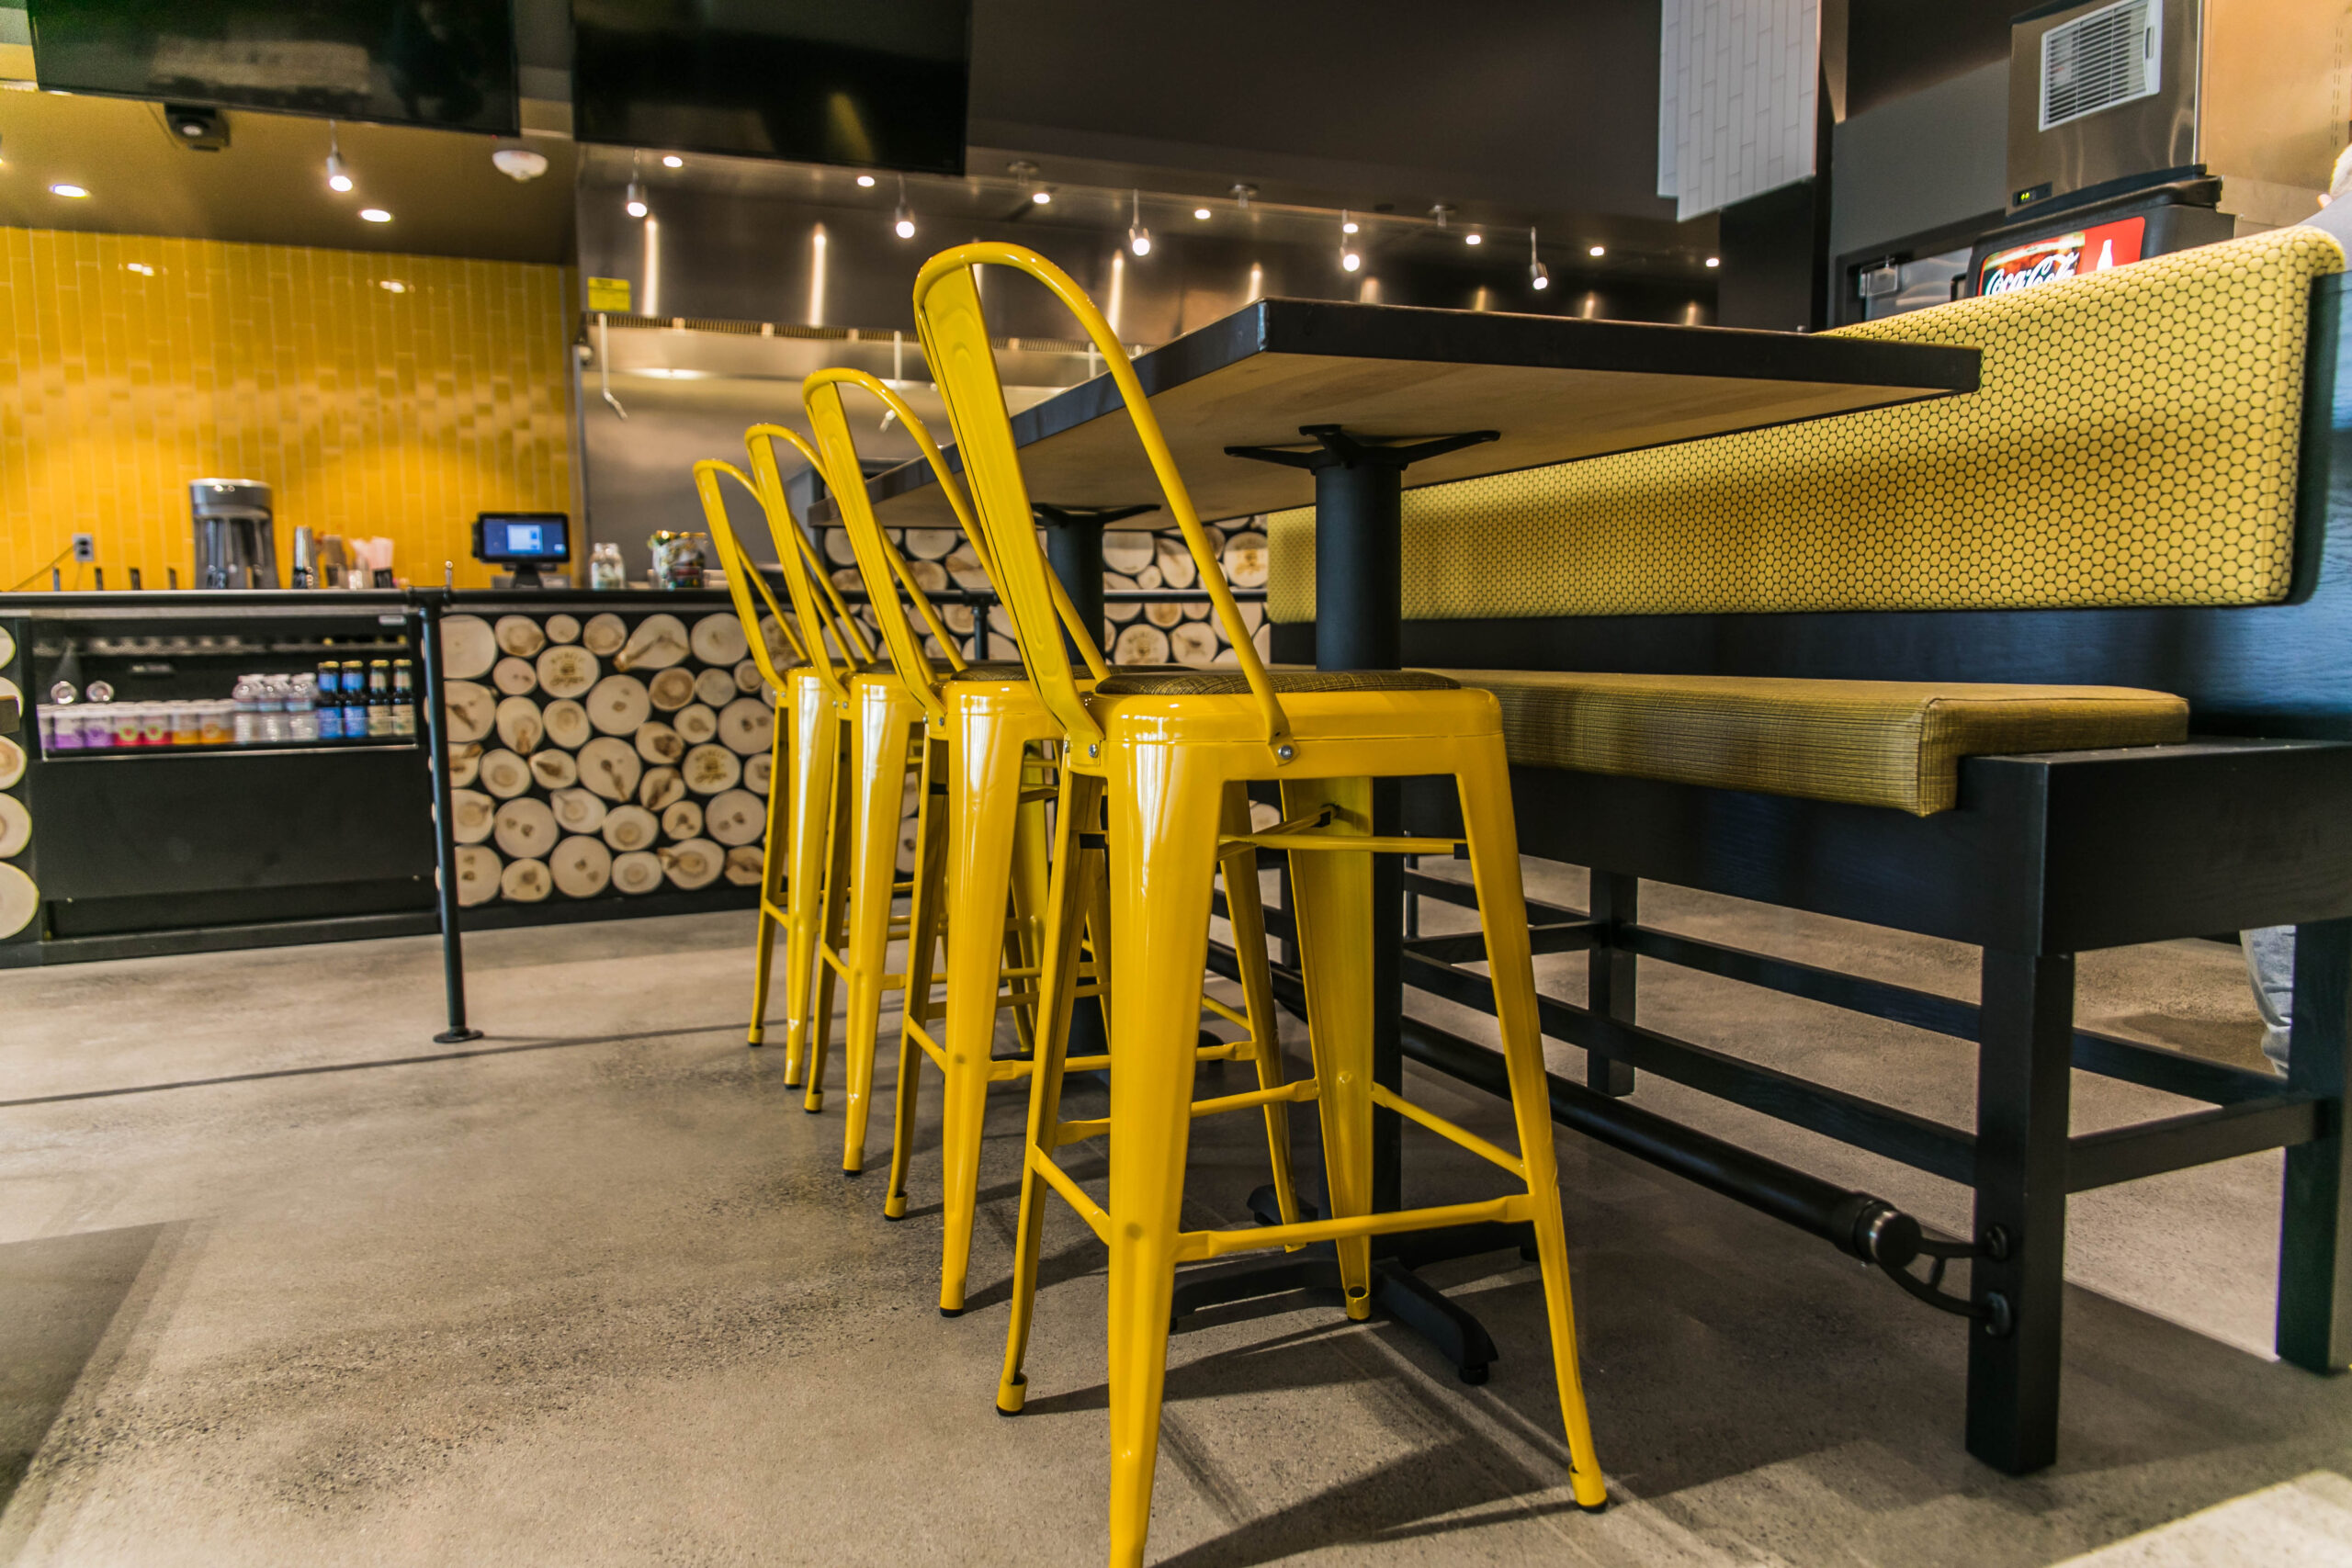 Fast Casual Burger restaurant, bar and dining area with yellow stools, seating and tables